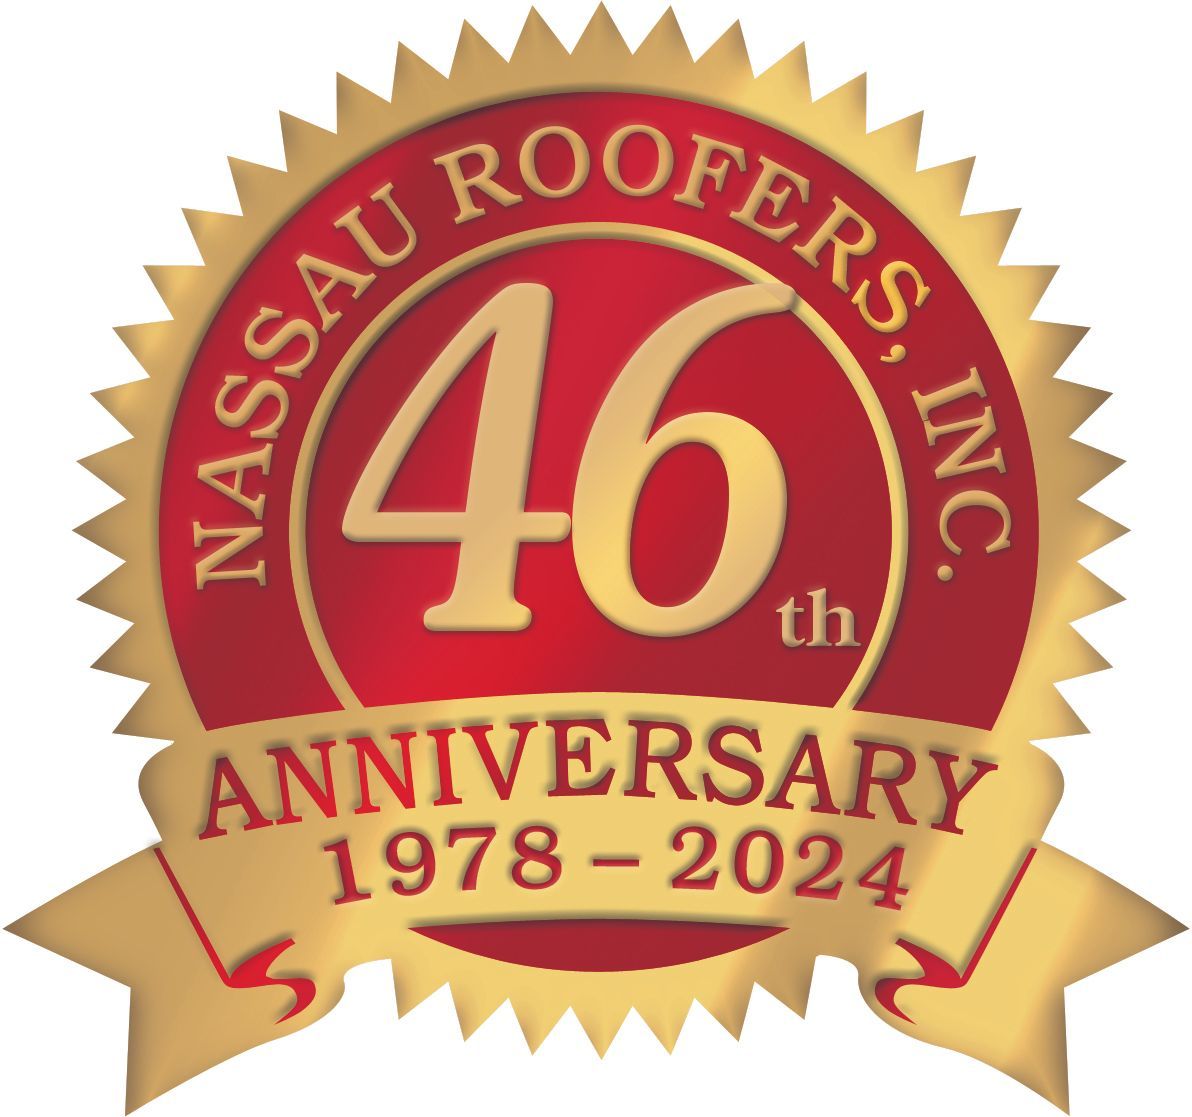 46th Anniversary Seal - East Meadow, NY - Nassau Roofers